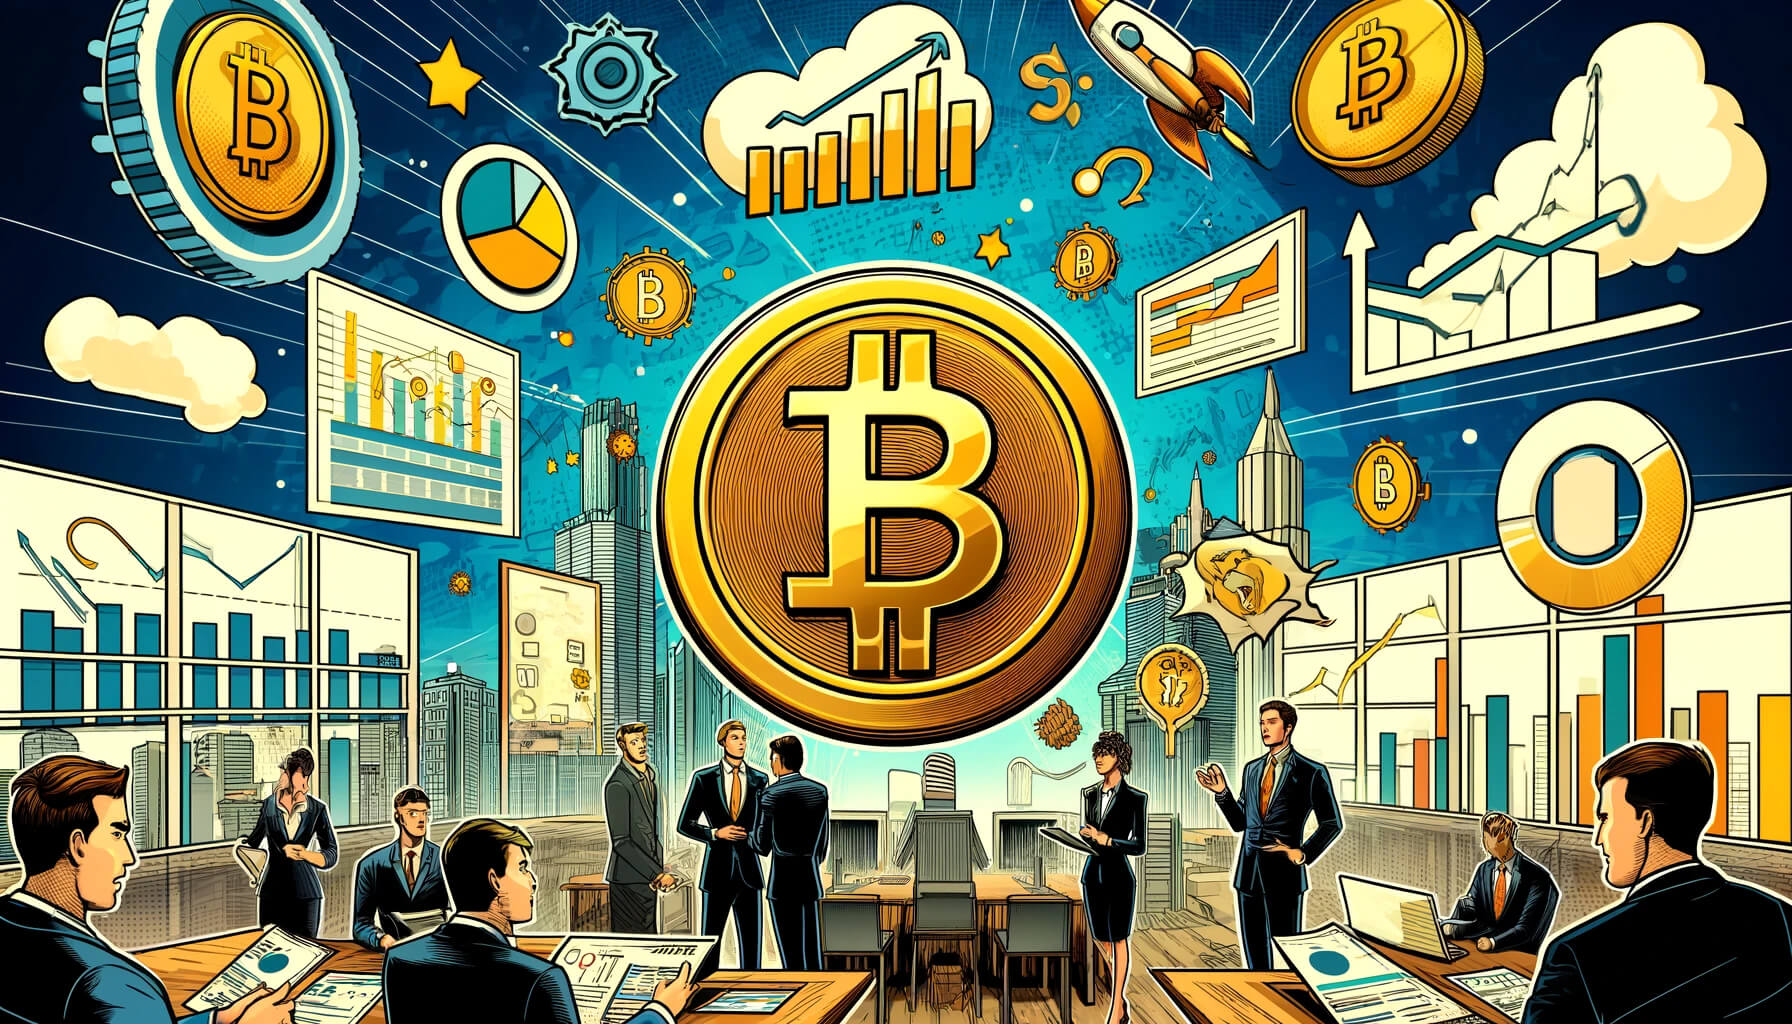 Bitcoin's Strategic Market Position: An In-Depth Investment Analysis